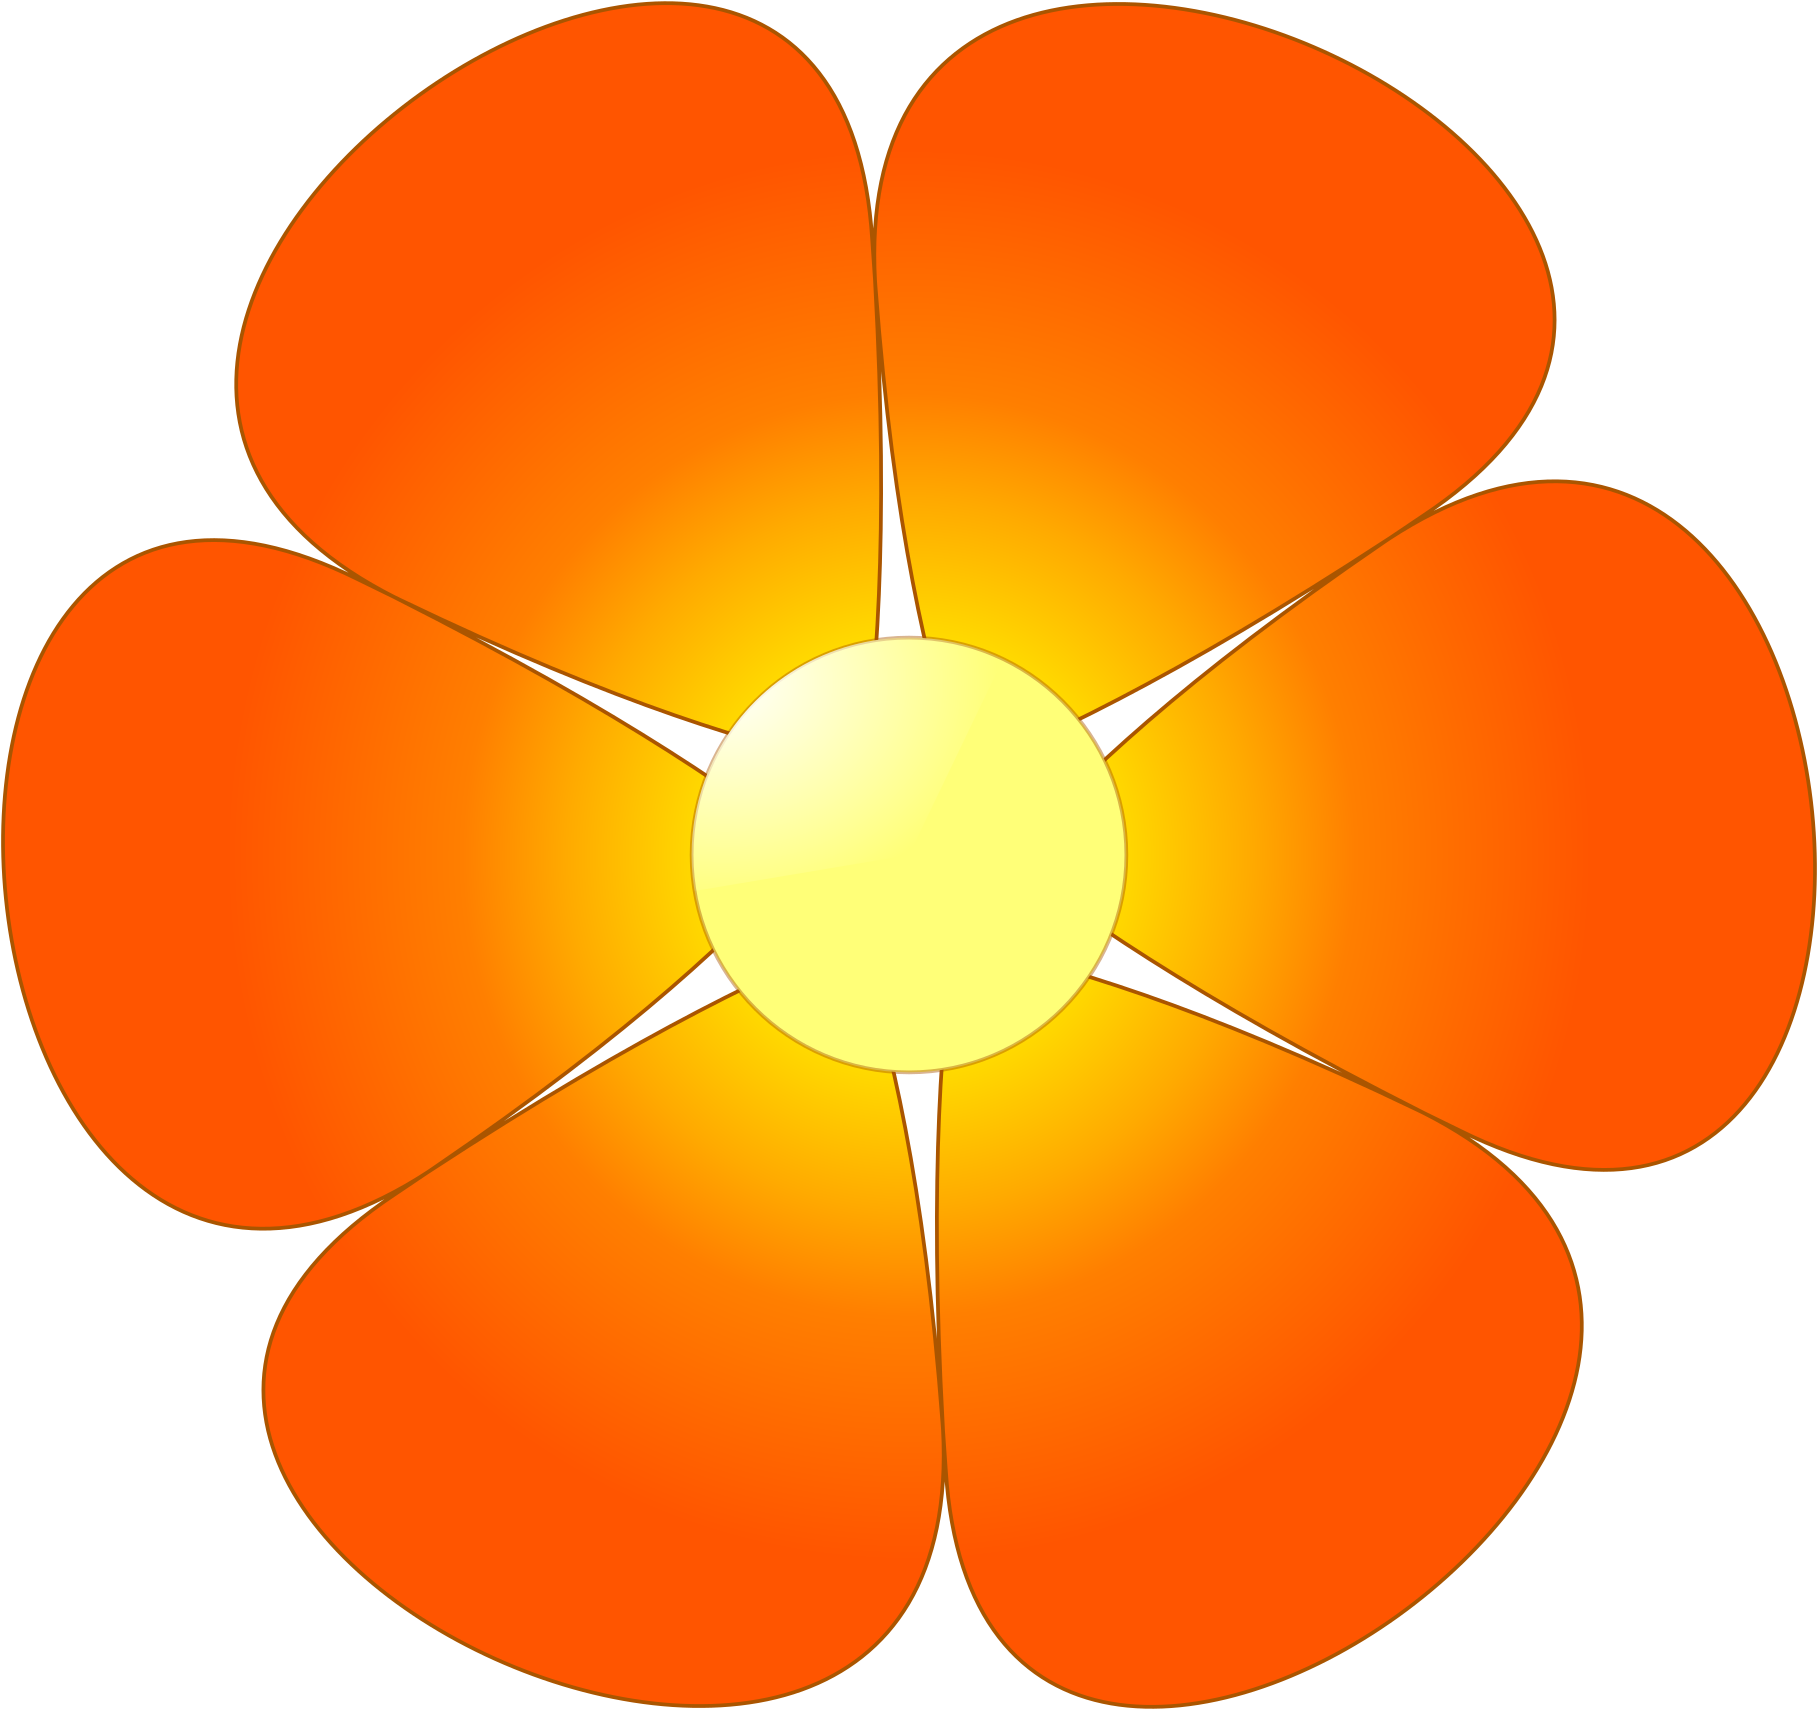 A Flower With A Light In The Center